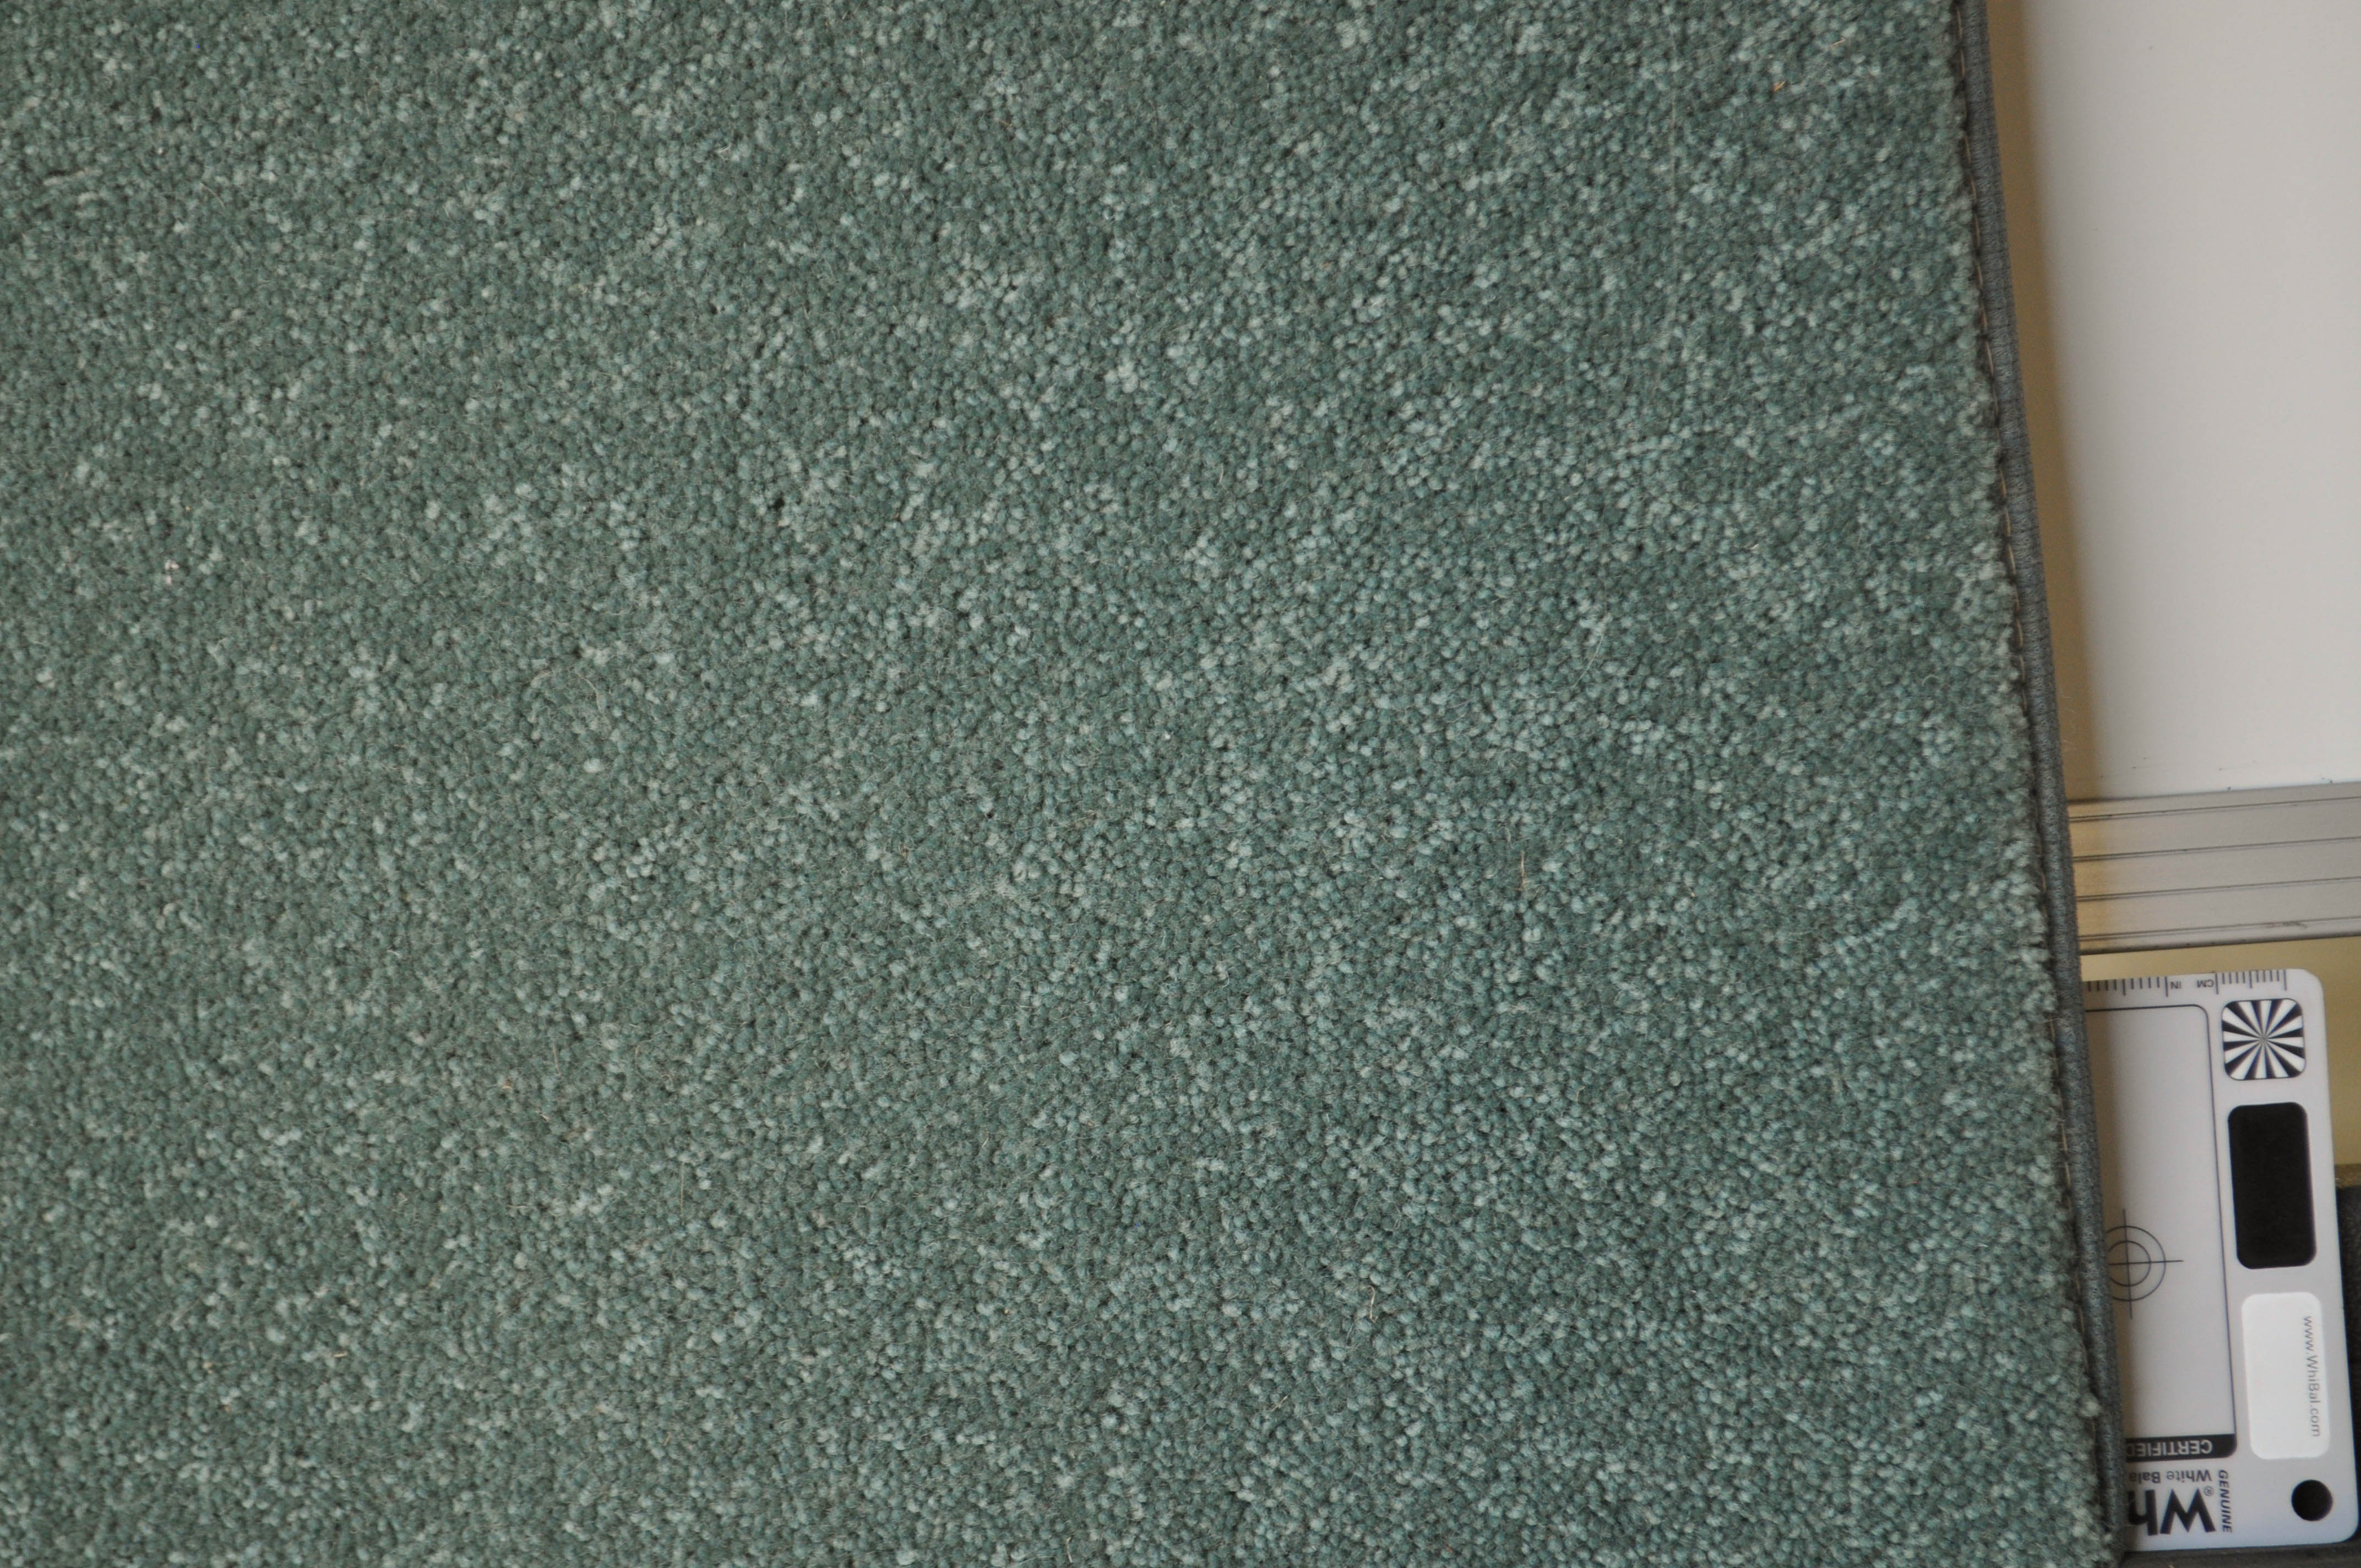 showing a sample of carpet, it being of a dark green color, 80%-20% wool-nylon yarn, twist pile carpet on sale at Concord Floors.